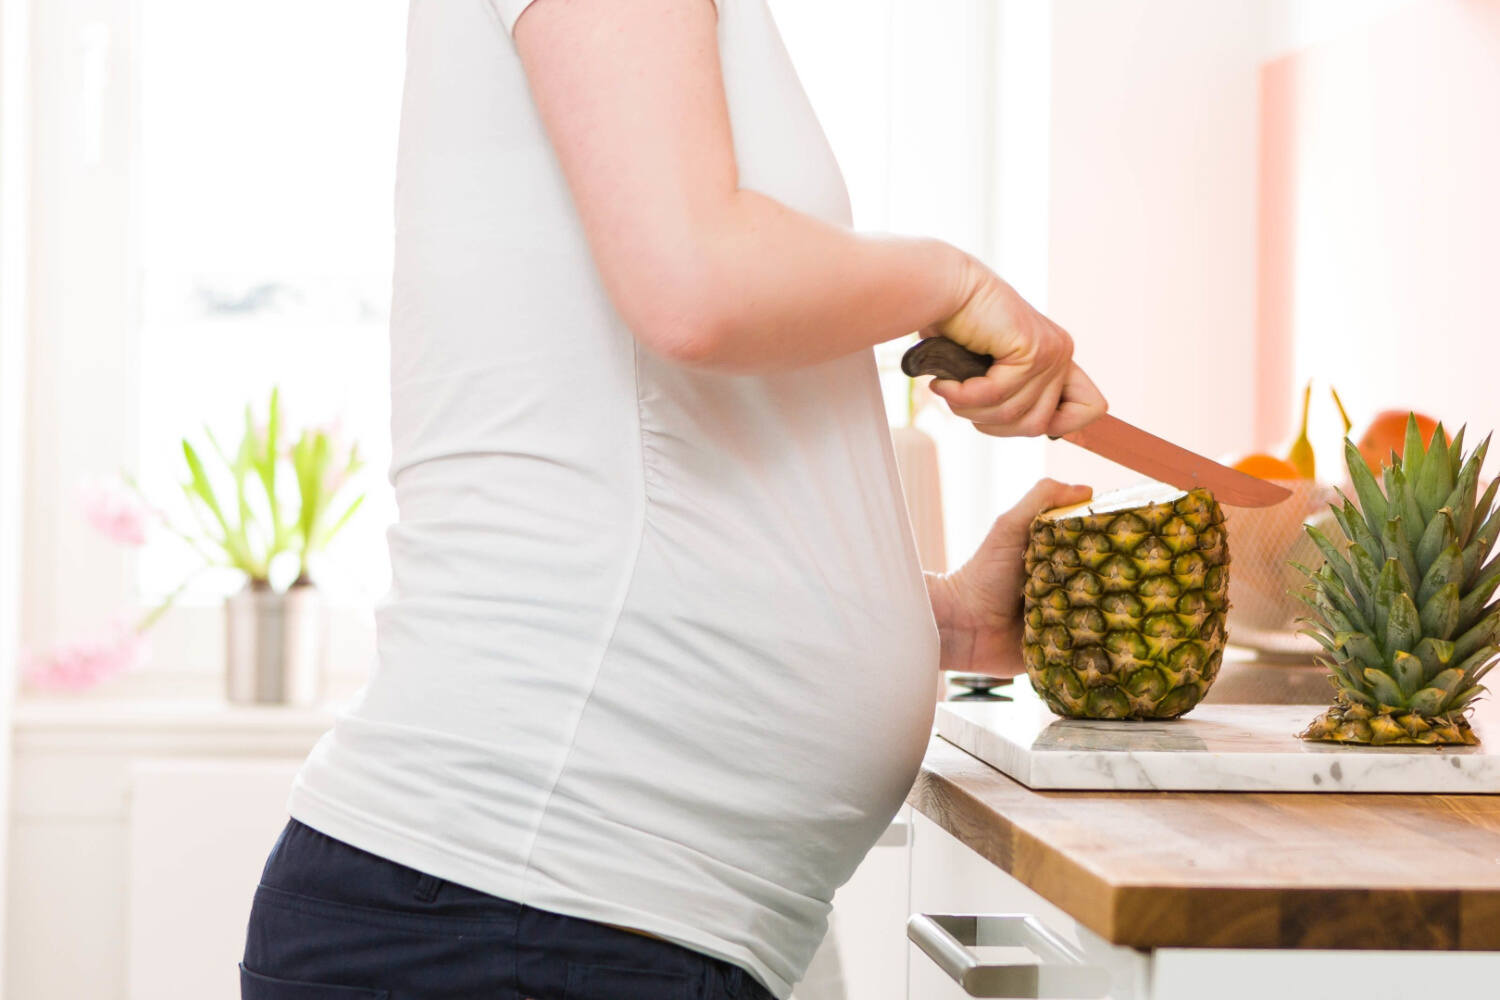 Ways To Include Pineapple To Induce Labor